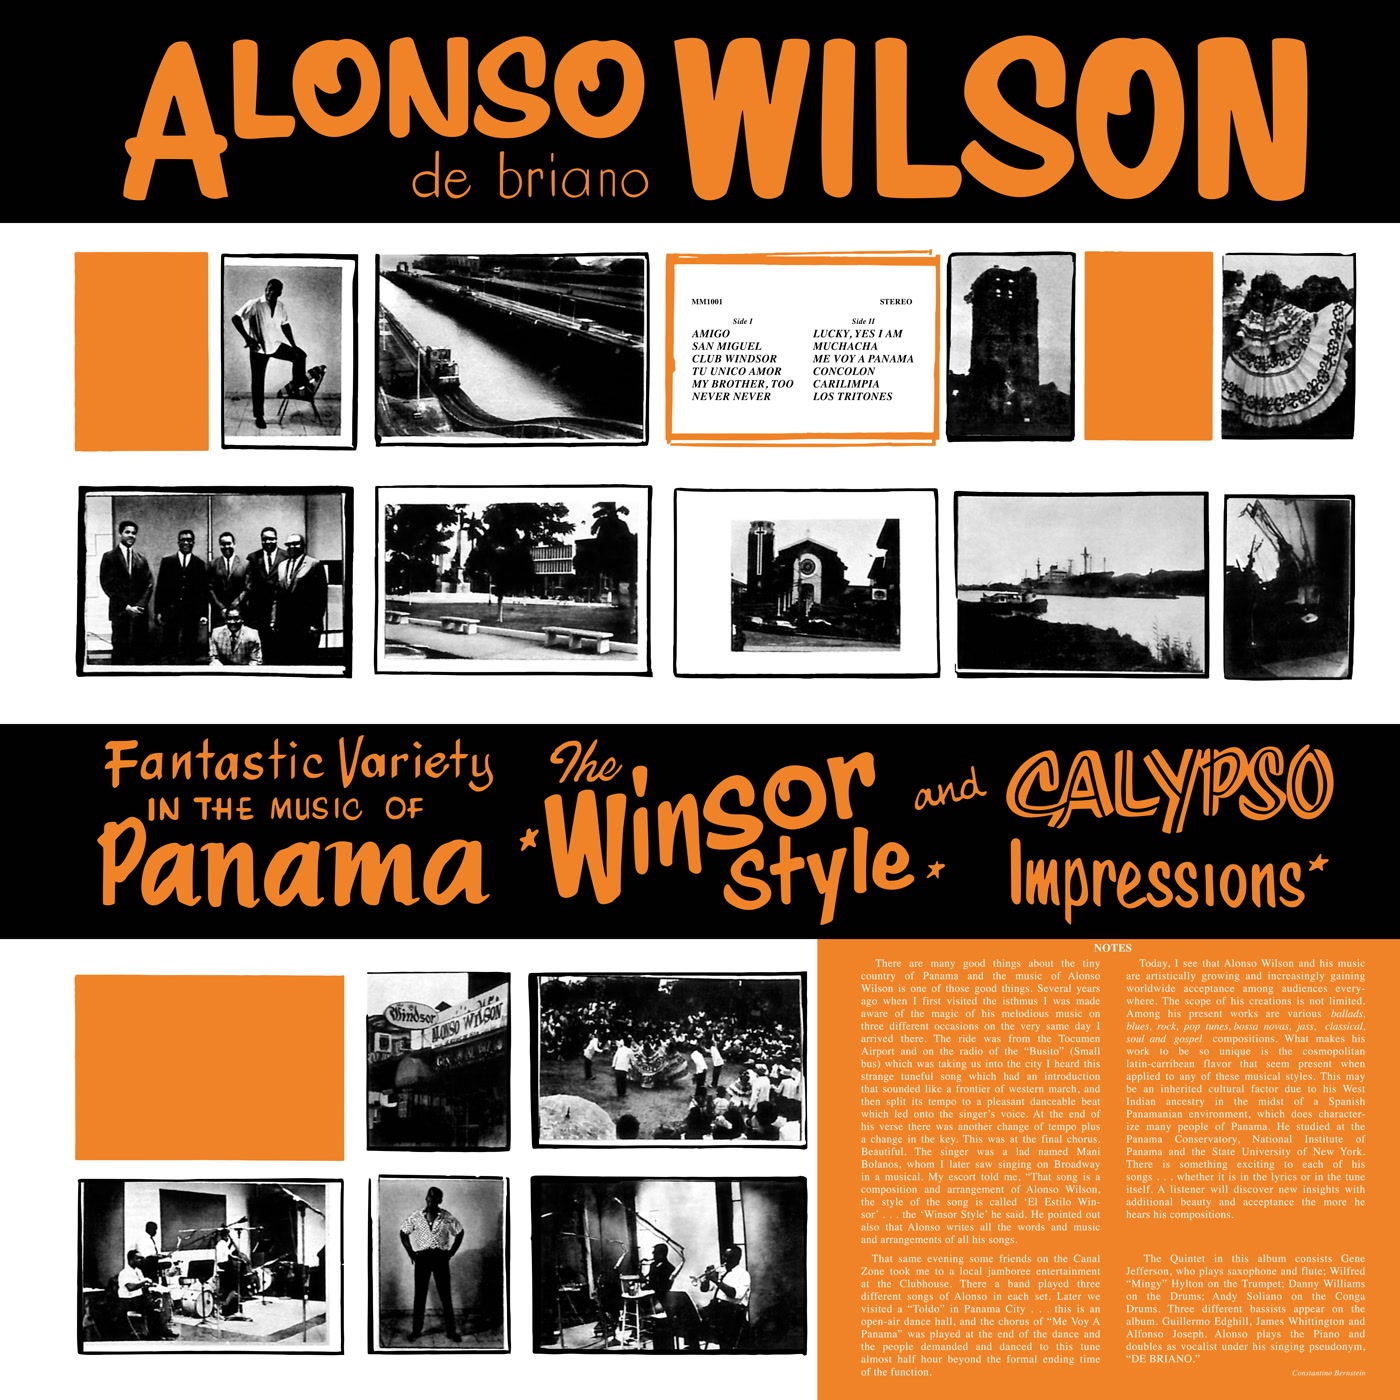 Alonso Wilson de Briano – Fantastic Variety in the Music of Panama: The Winsor Style and Calypso Impressions (1961/2021) [FLAC 24bit/96kHz]